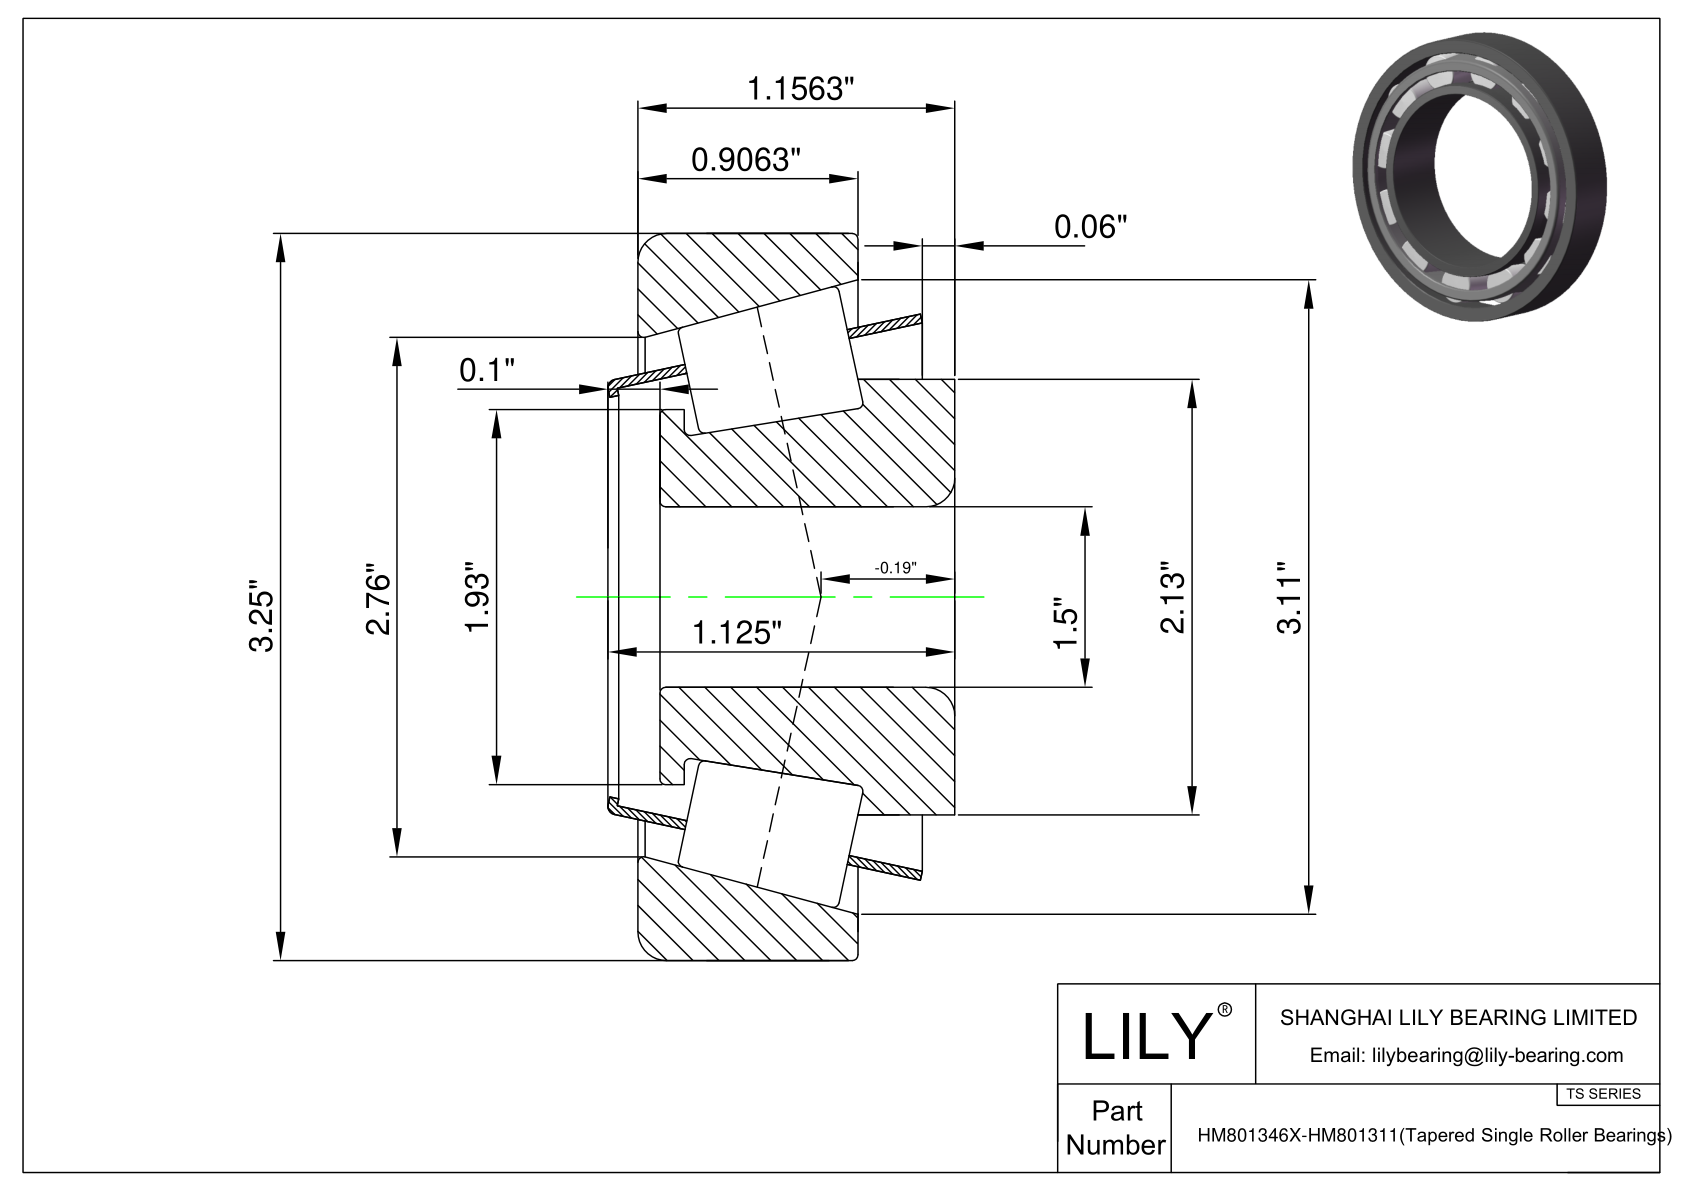 HM801346X-HM801311 TS (Tapered Single Roller Bearings) (Imperial) cad drawing